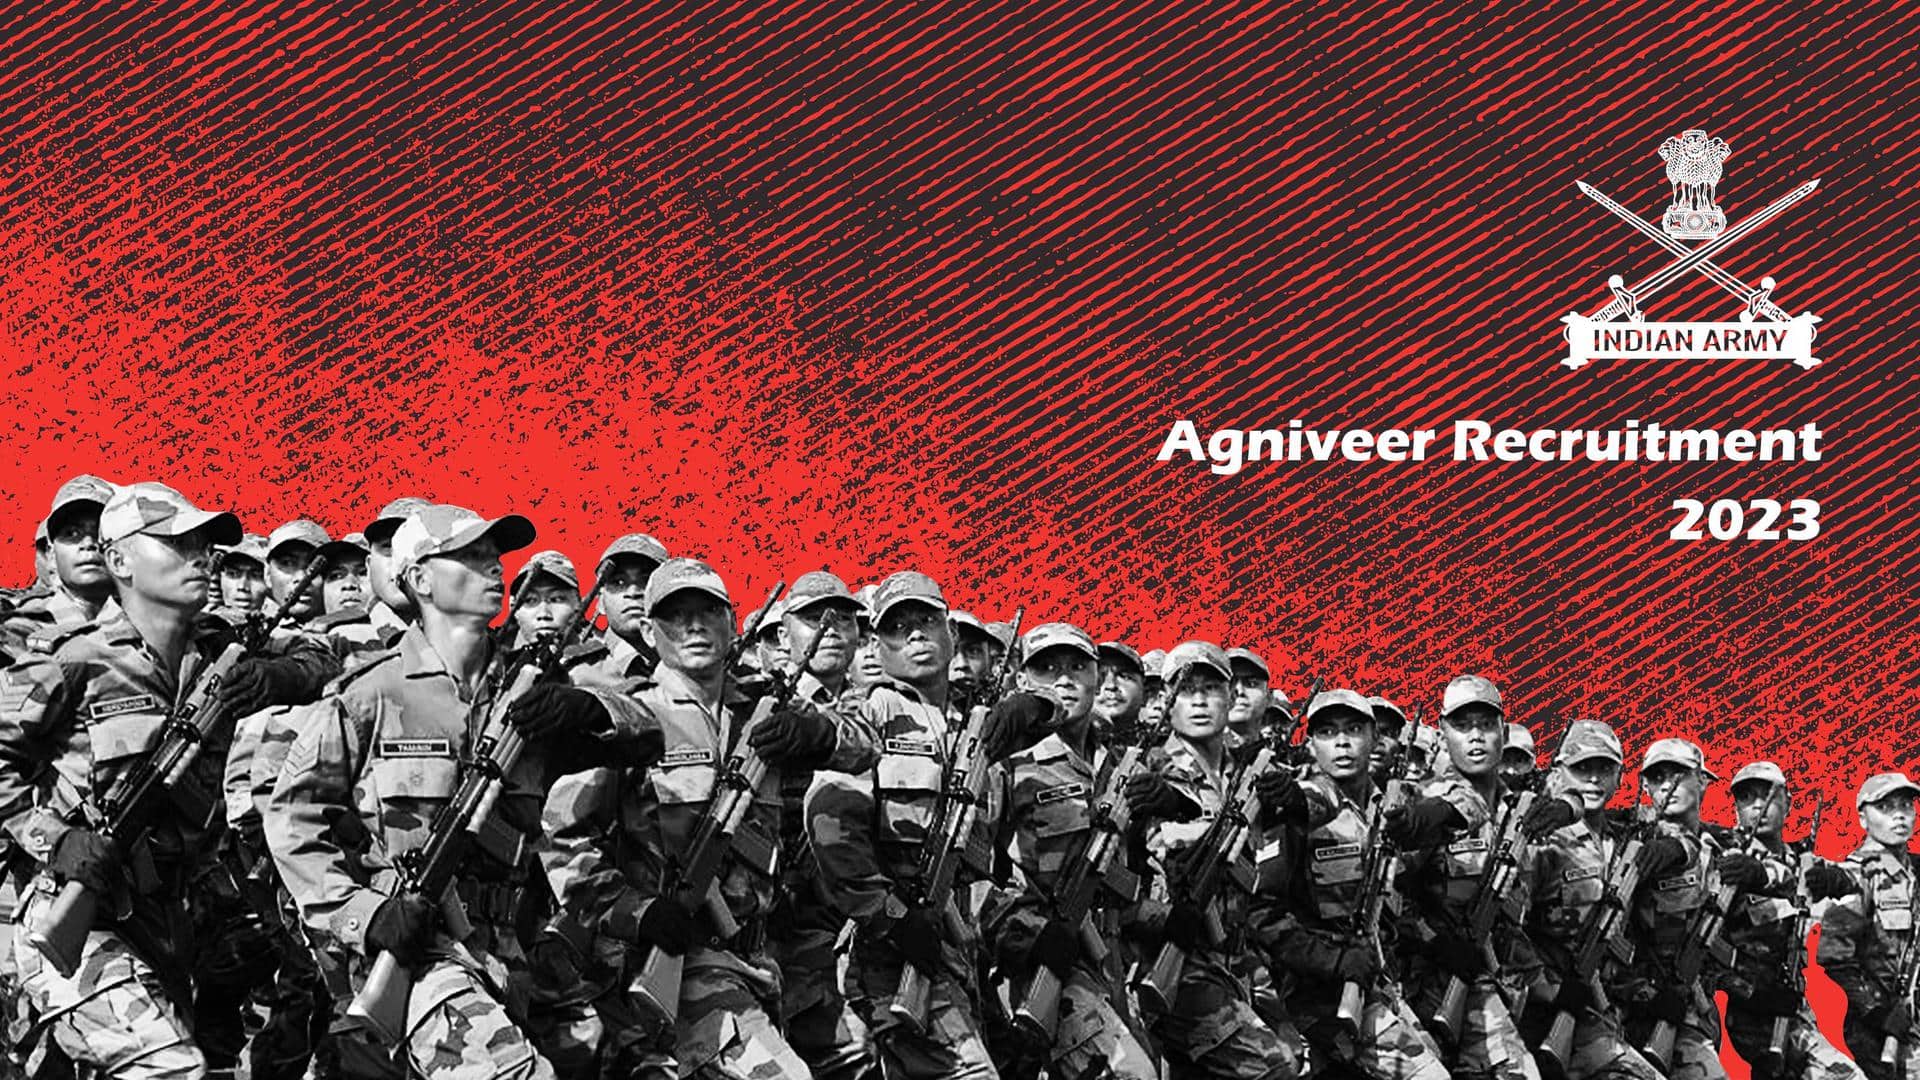 Agnipath scheme: Indian Army changes recruitment process for Agniveers